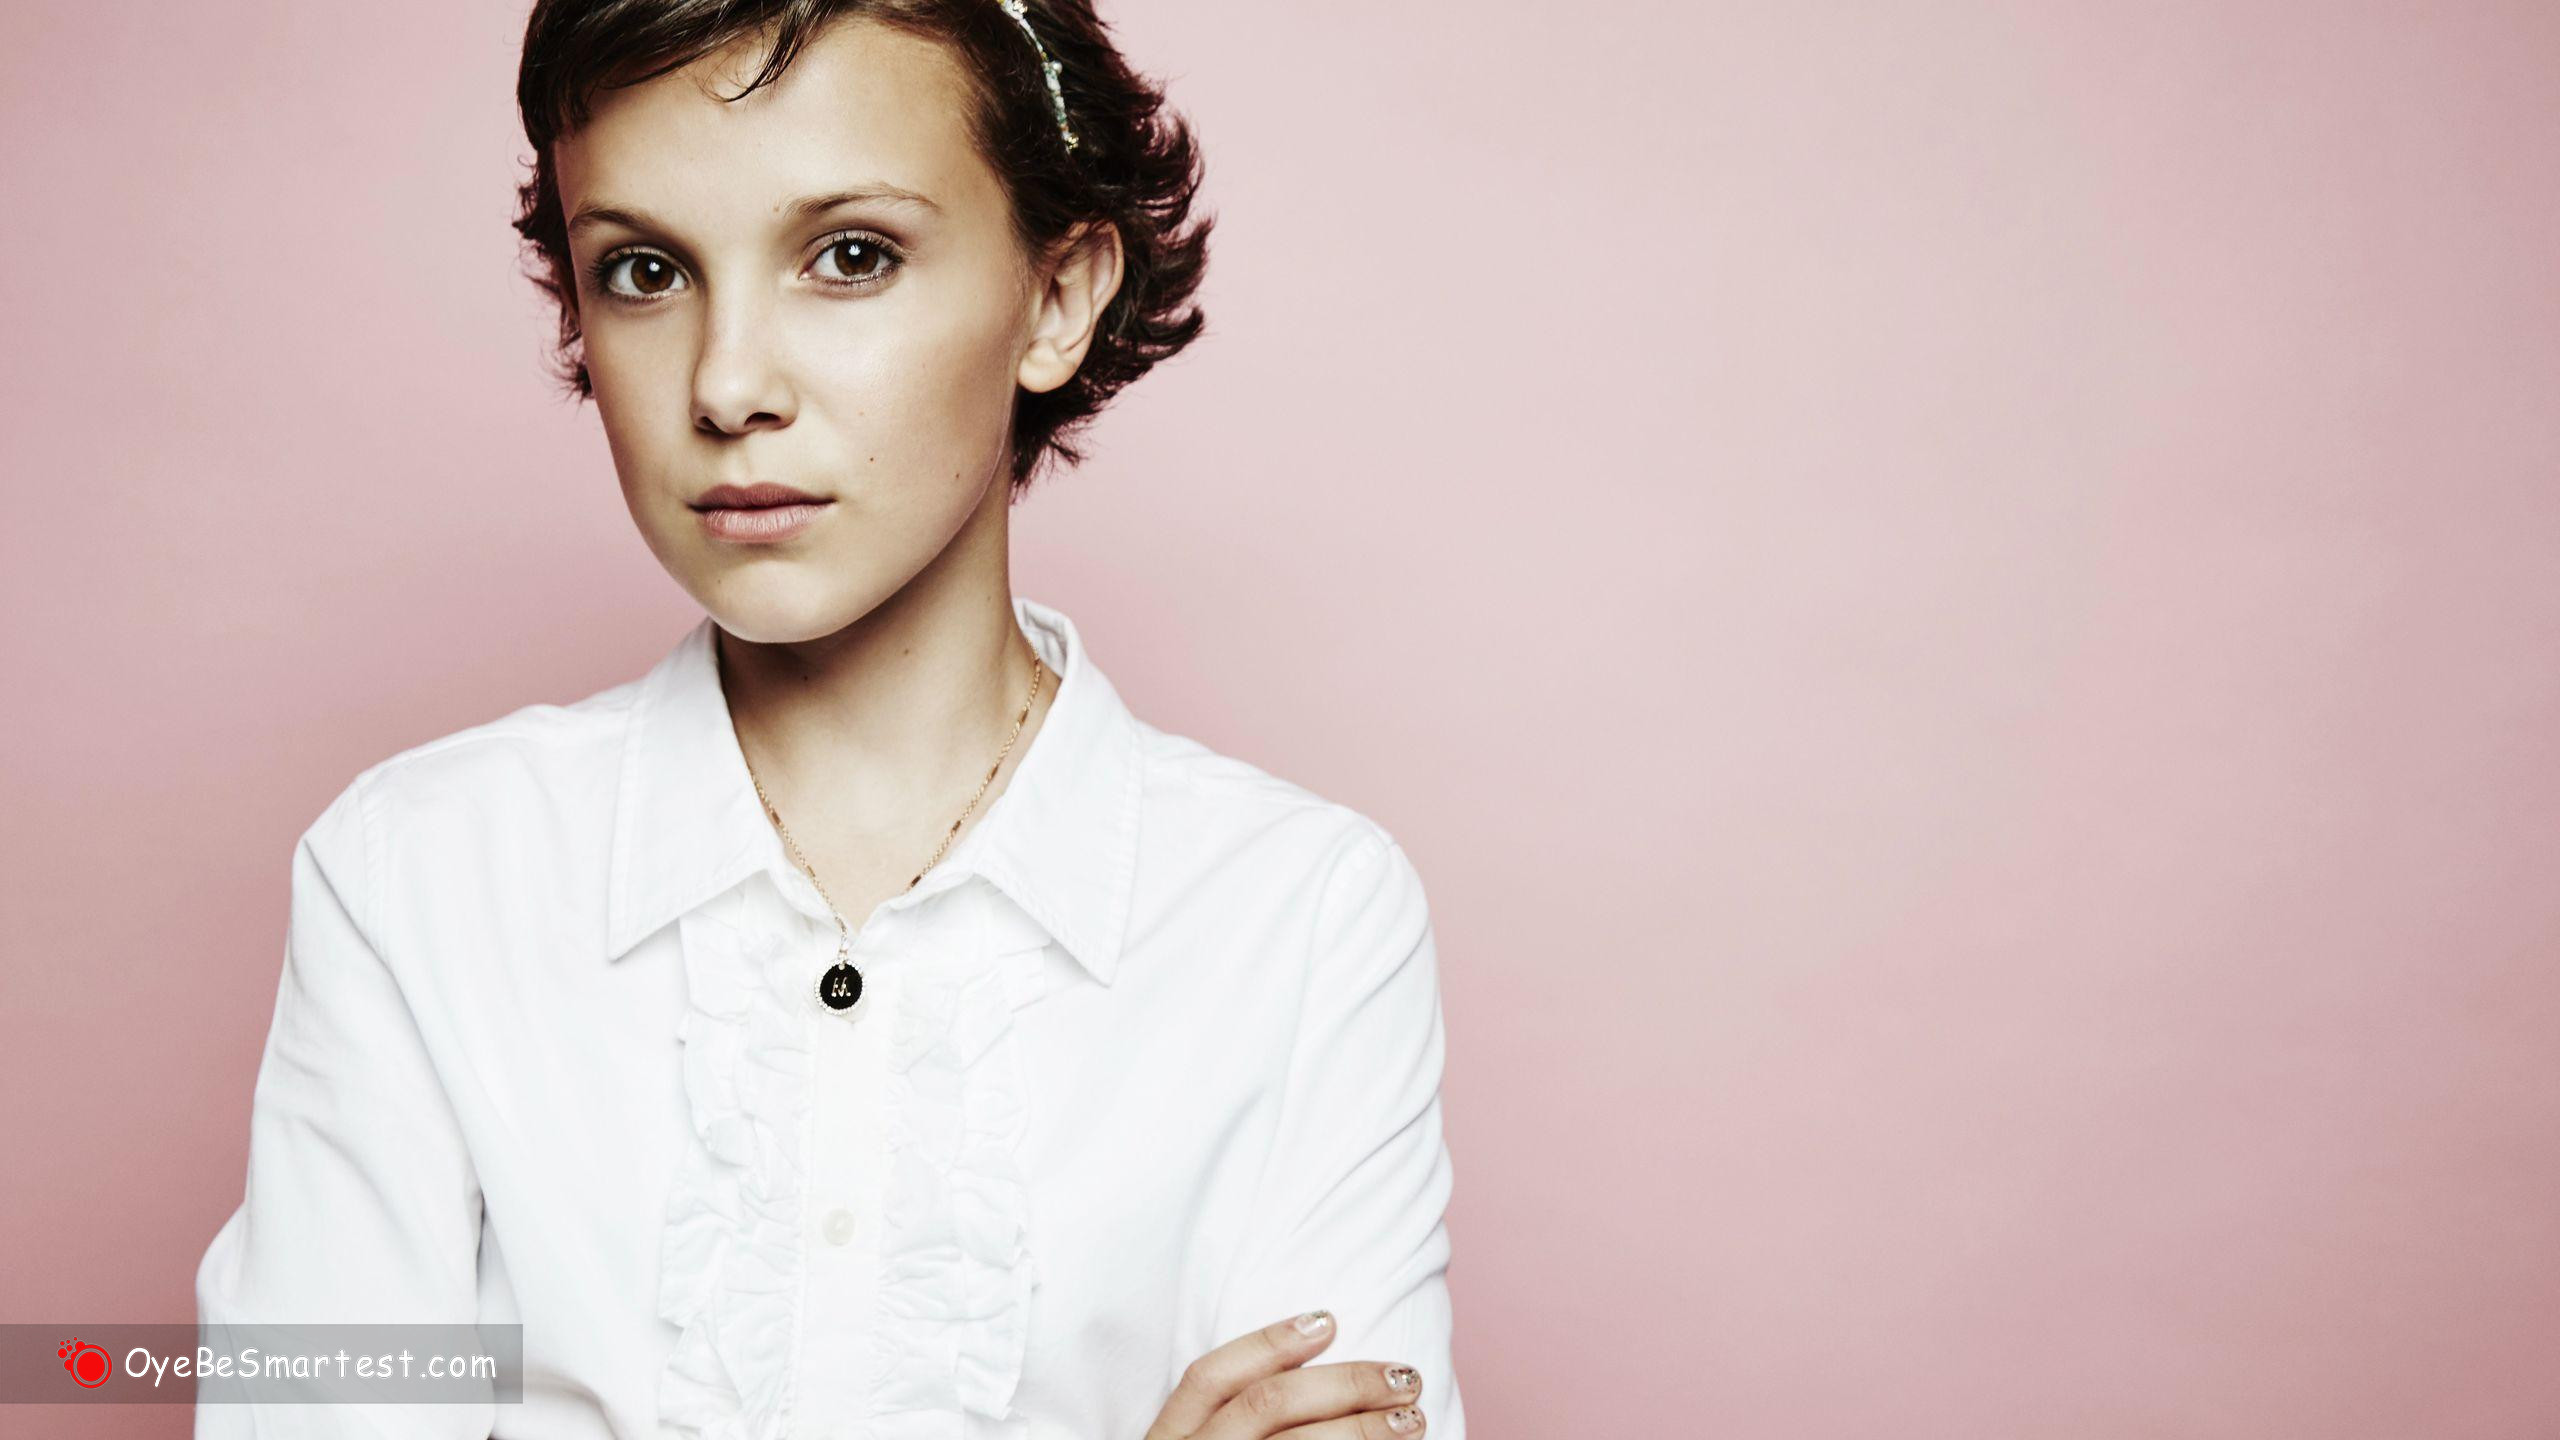 Millie Bobby Brown Photoshoot 2020 Wallpapers